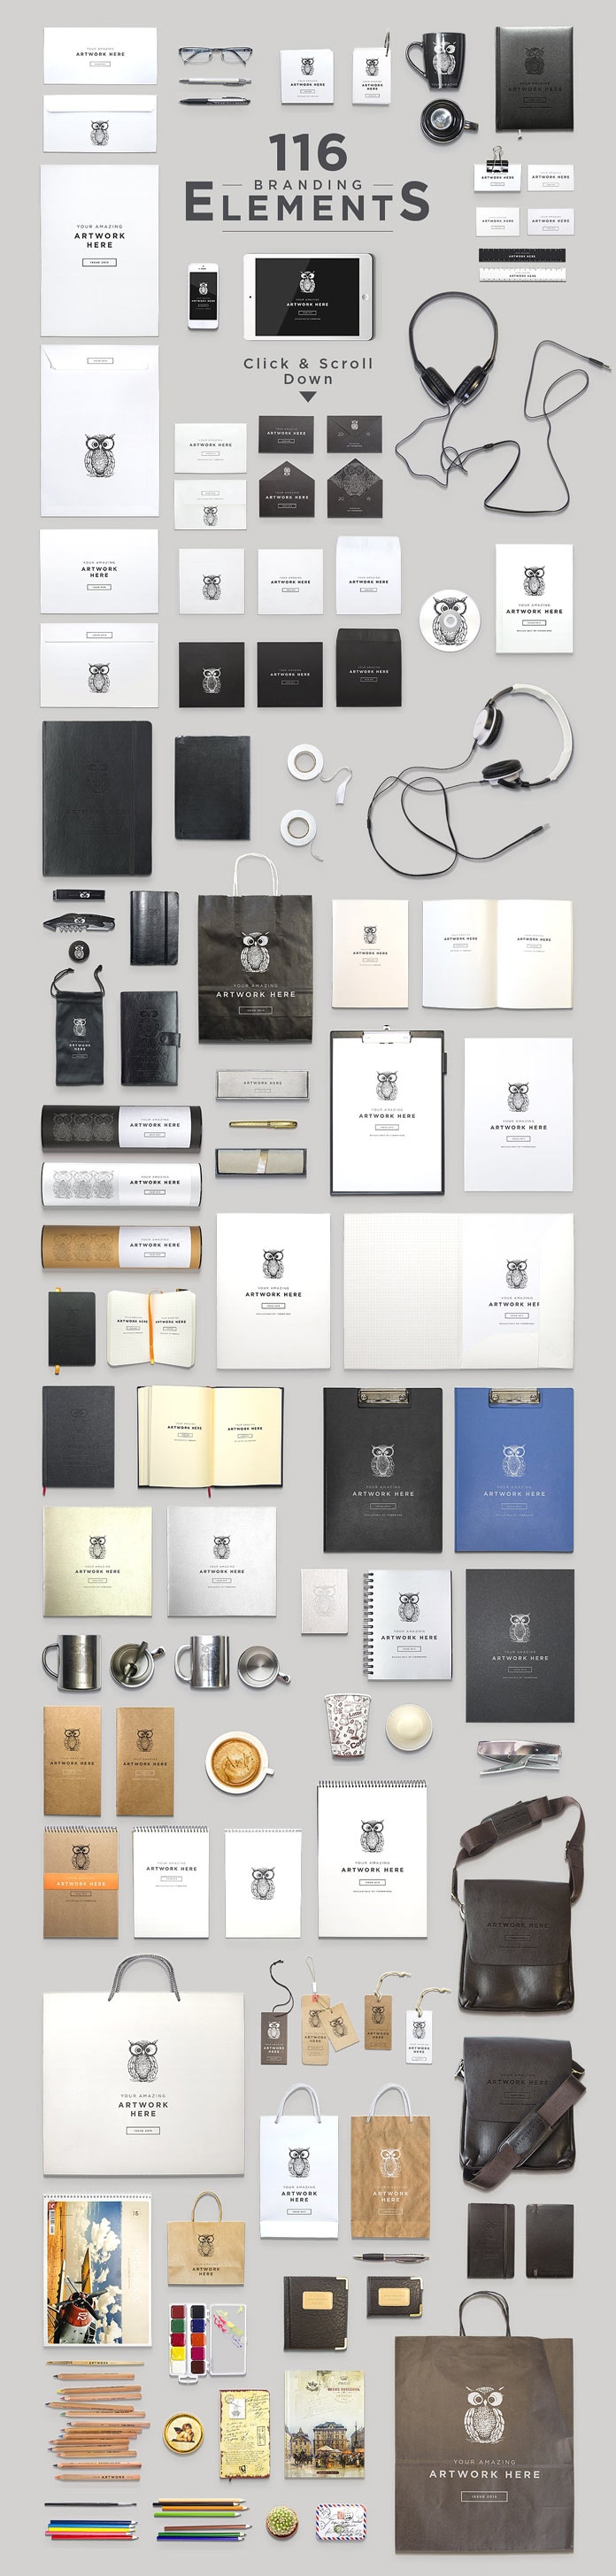 116 elements of brand and stationery materials.